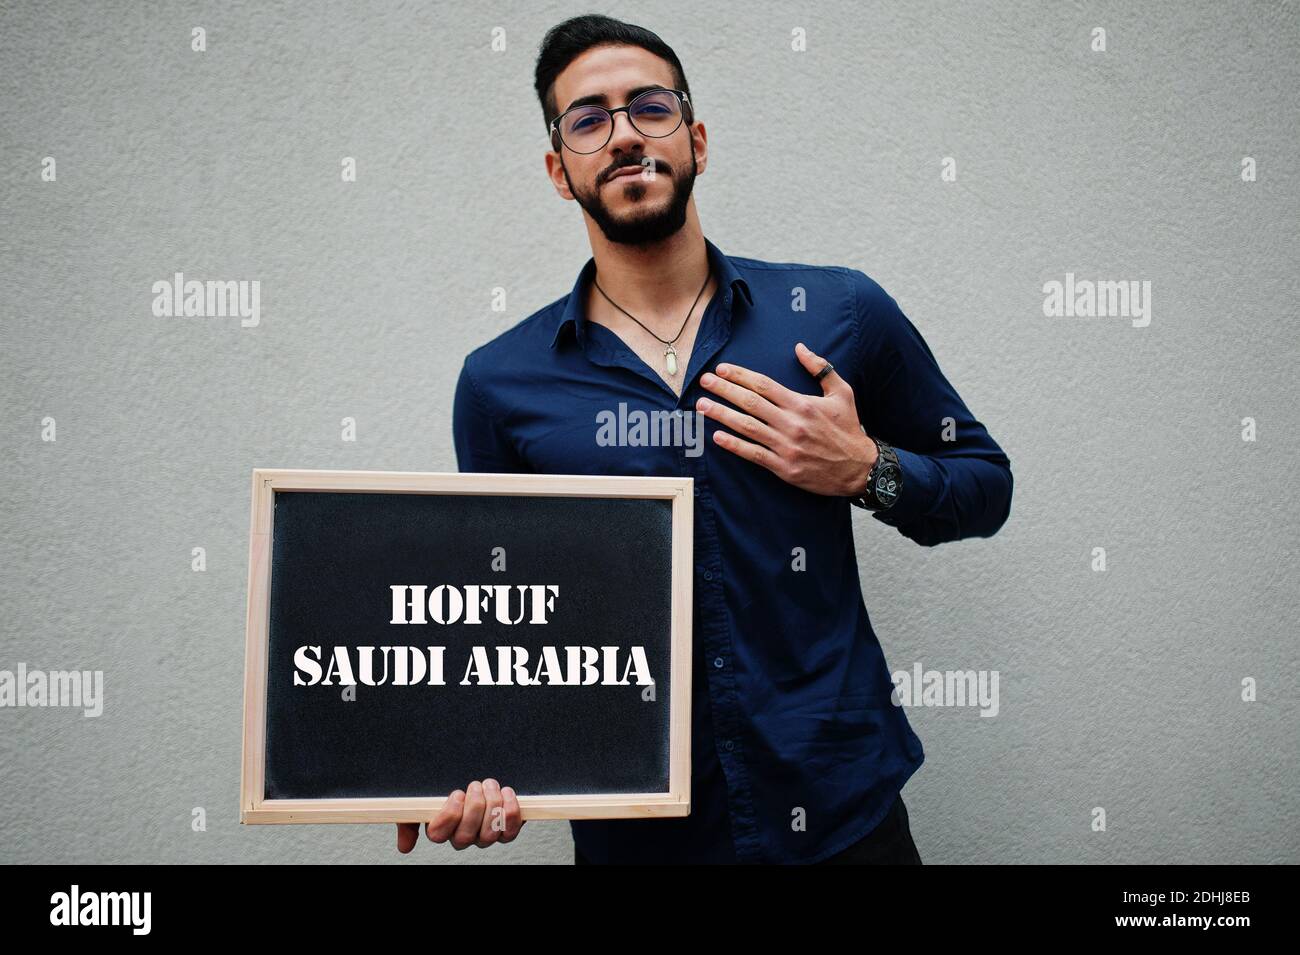 Arab man wear blue shirt and eyeglasses hold board with Hofuf  Saudi Arabia inscription. Largest cities in islamic world concept. Stock Photo